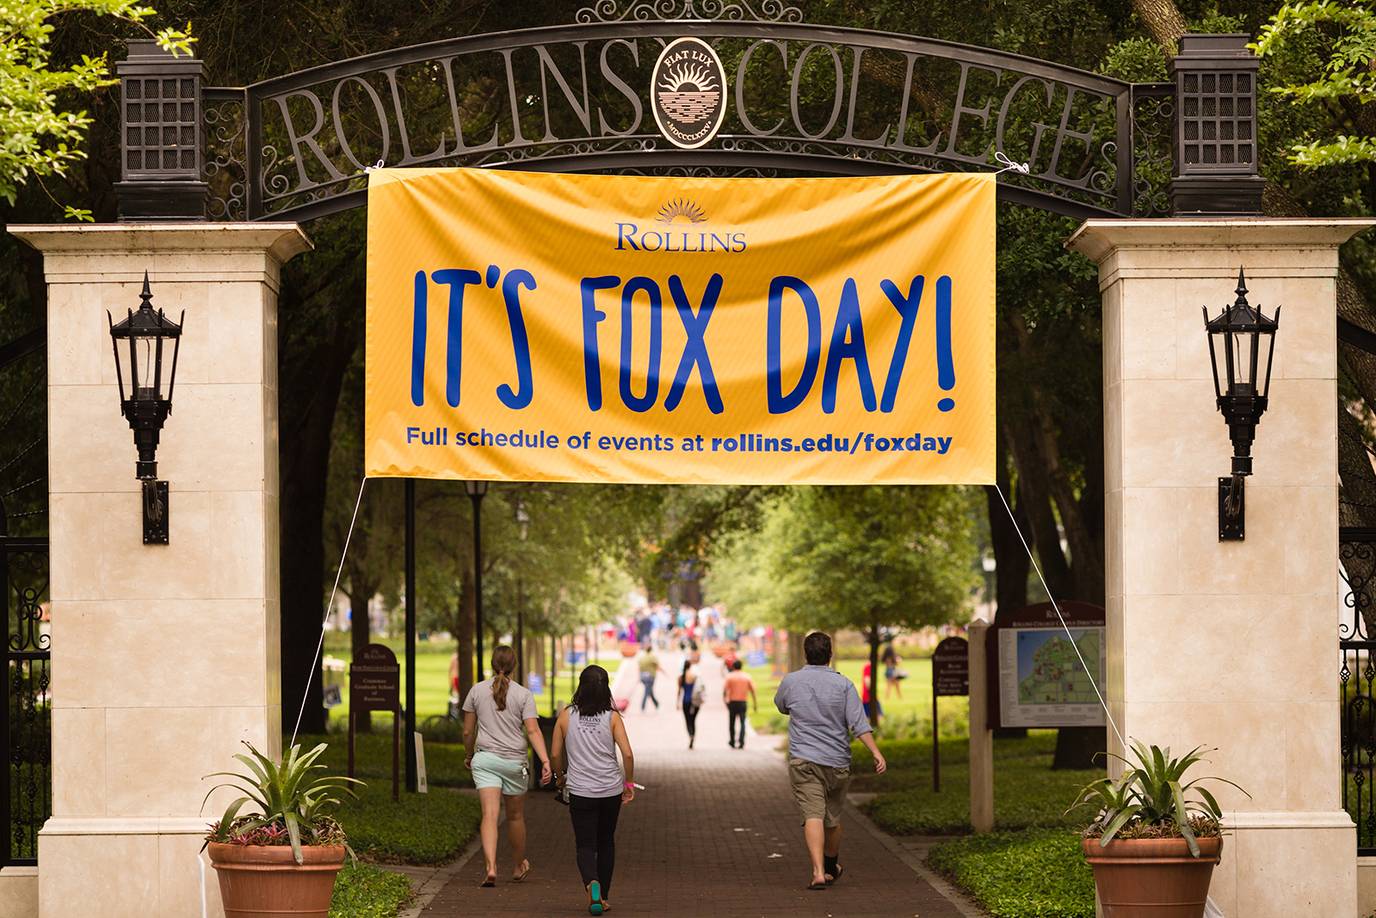 A banner announcing Fox Day hangs over Rollins' main gate.